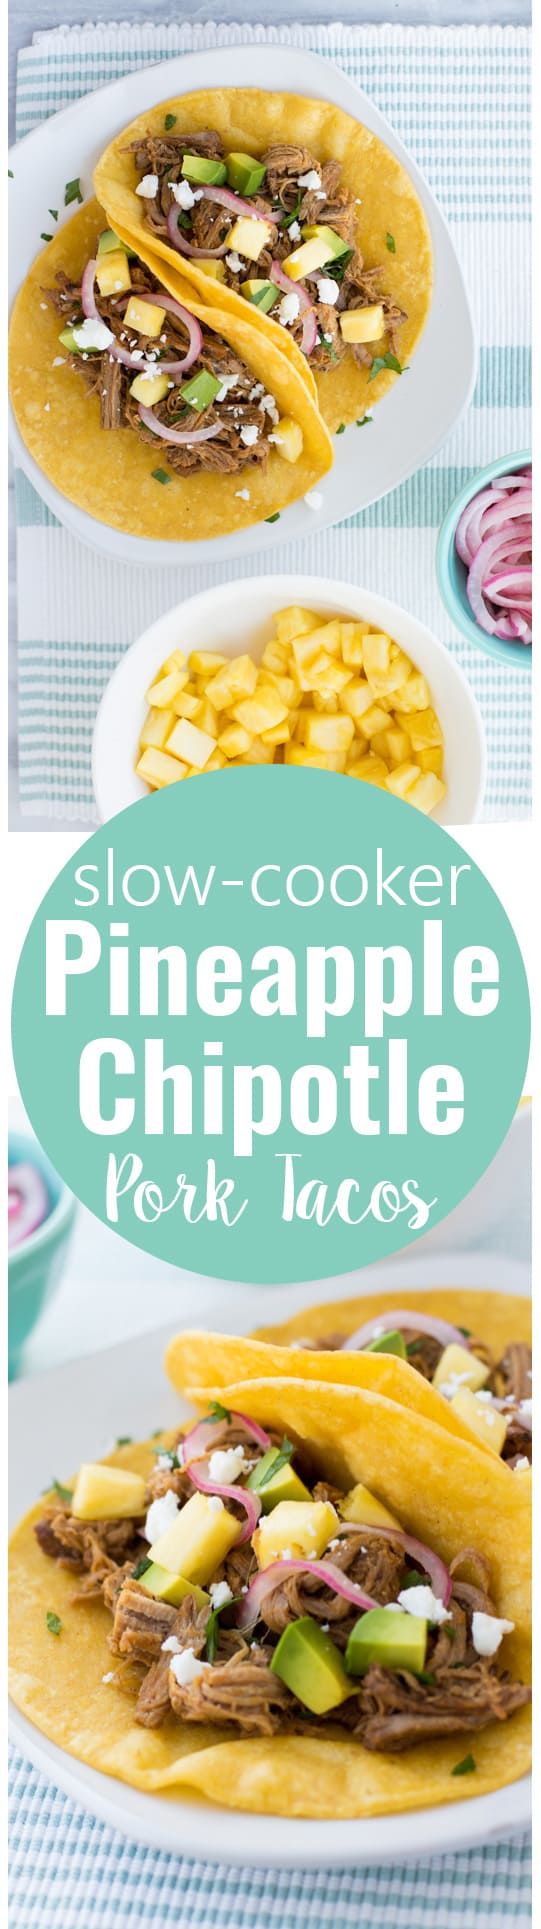 Slow-Cooker Pineapple Chipotle Pork Tacos-- simple to make in the crockpot, and full of amazing flavor!